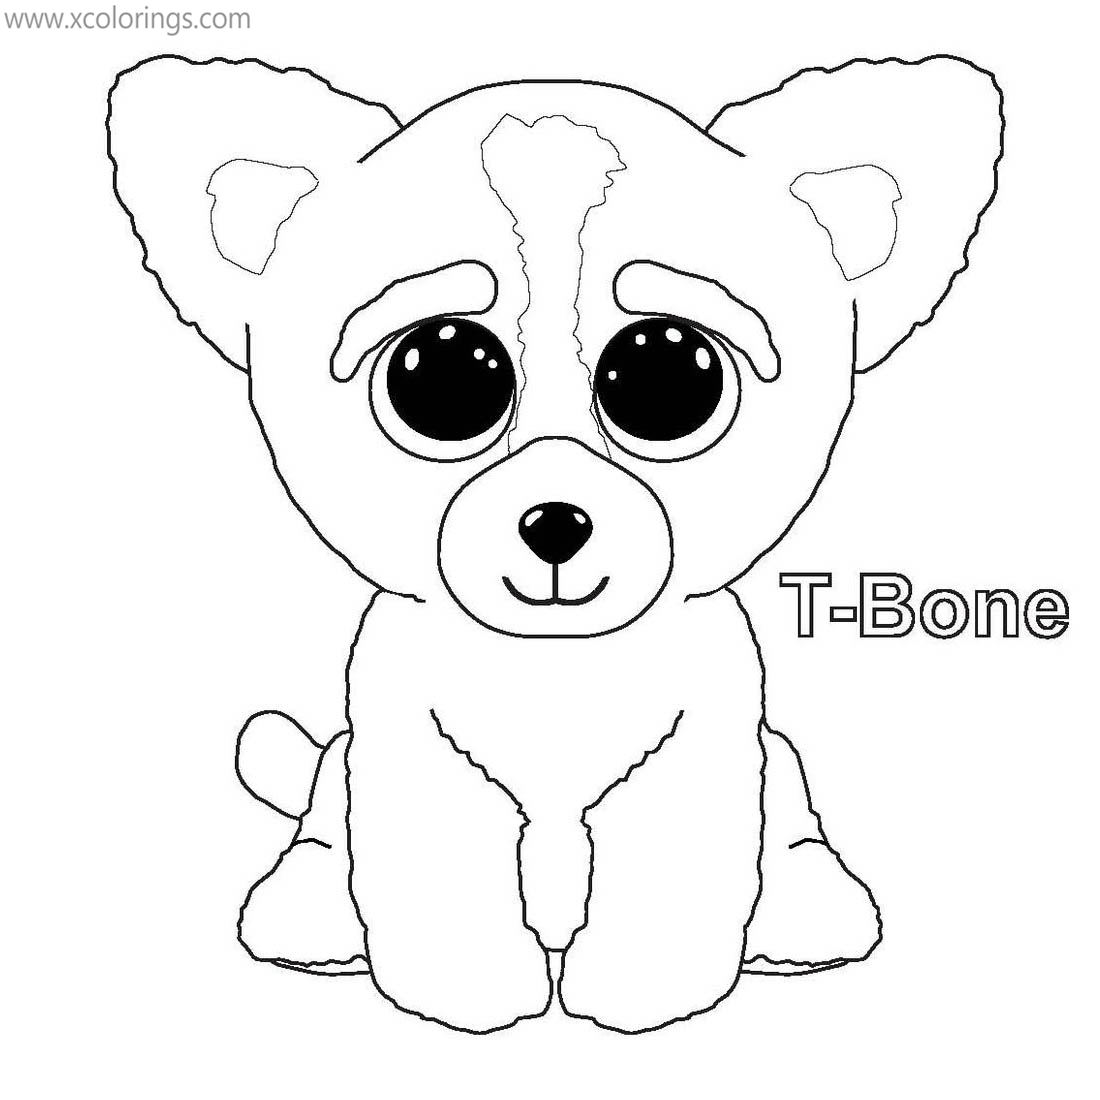 Free Beanie Boos Coloring Pages Dog T-Bone printable